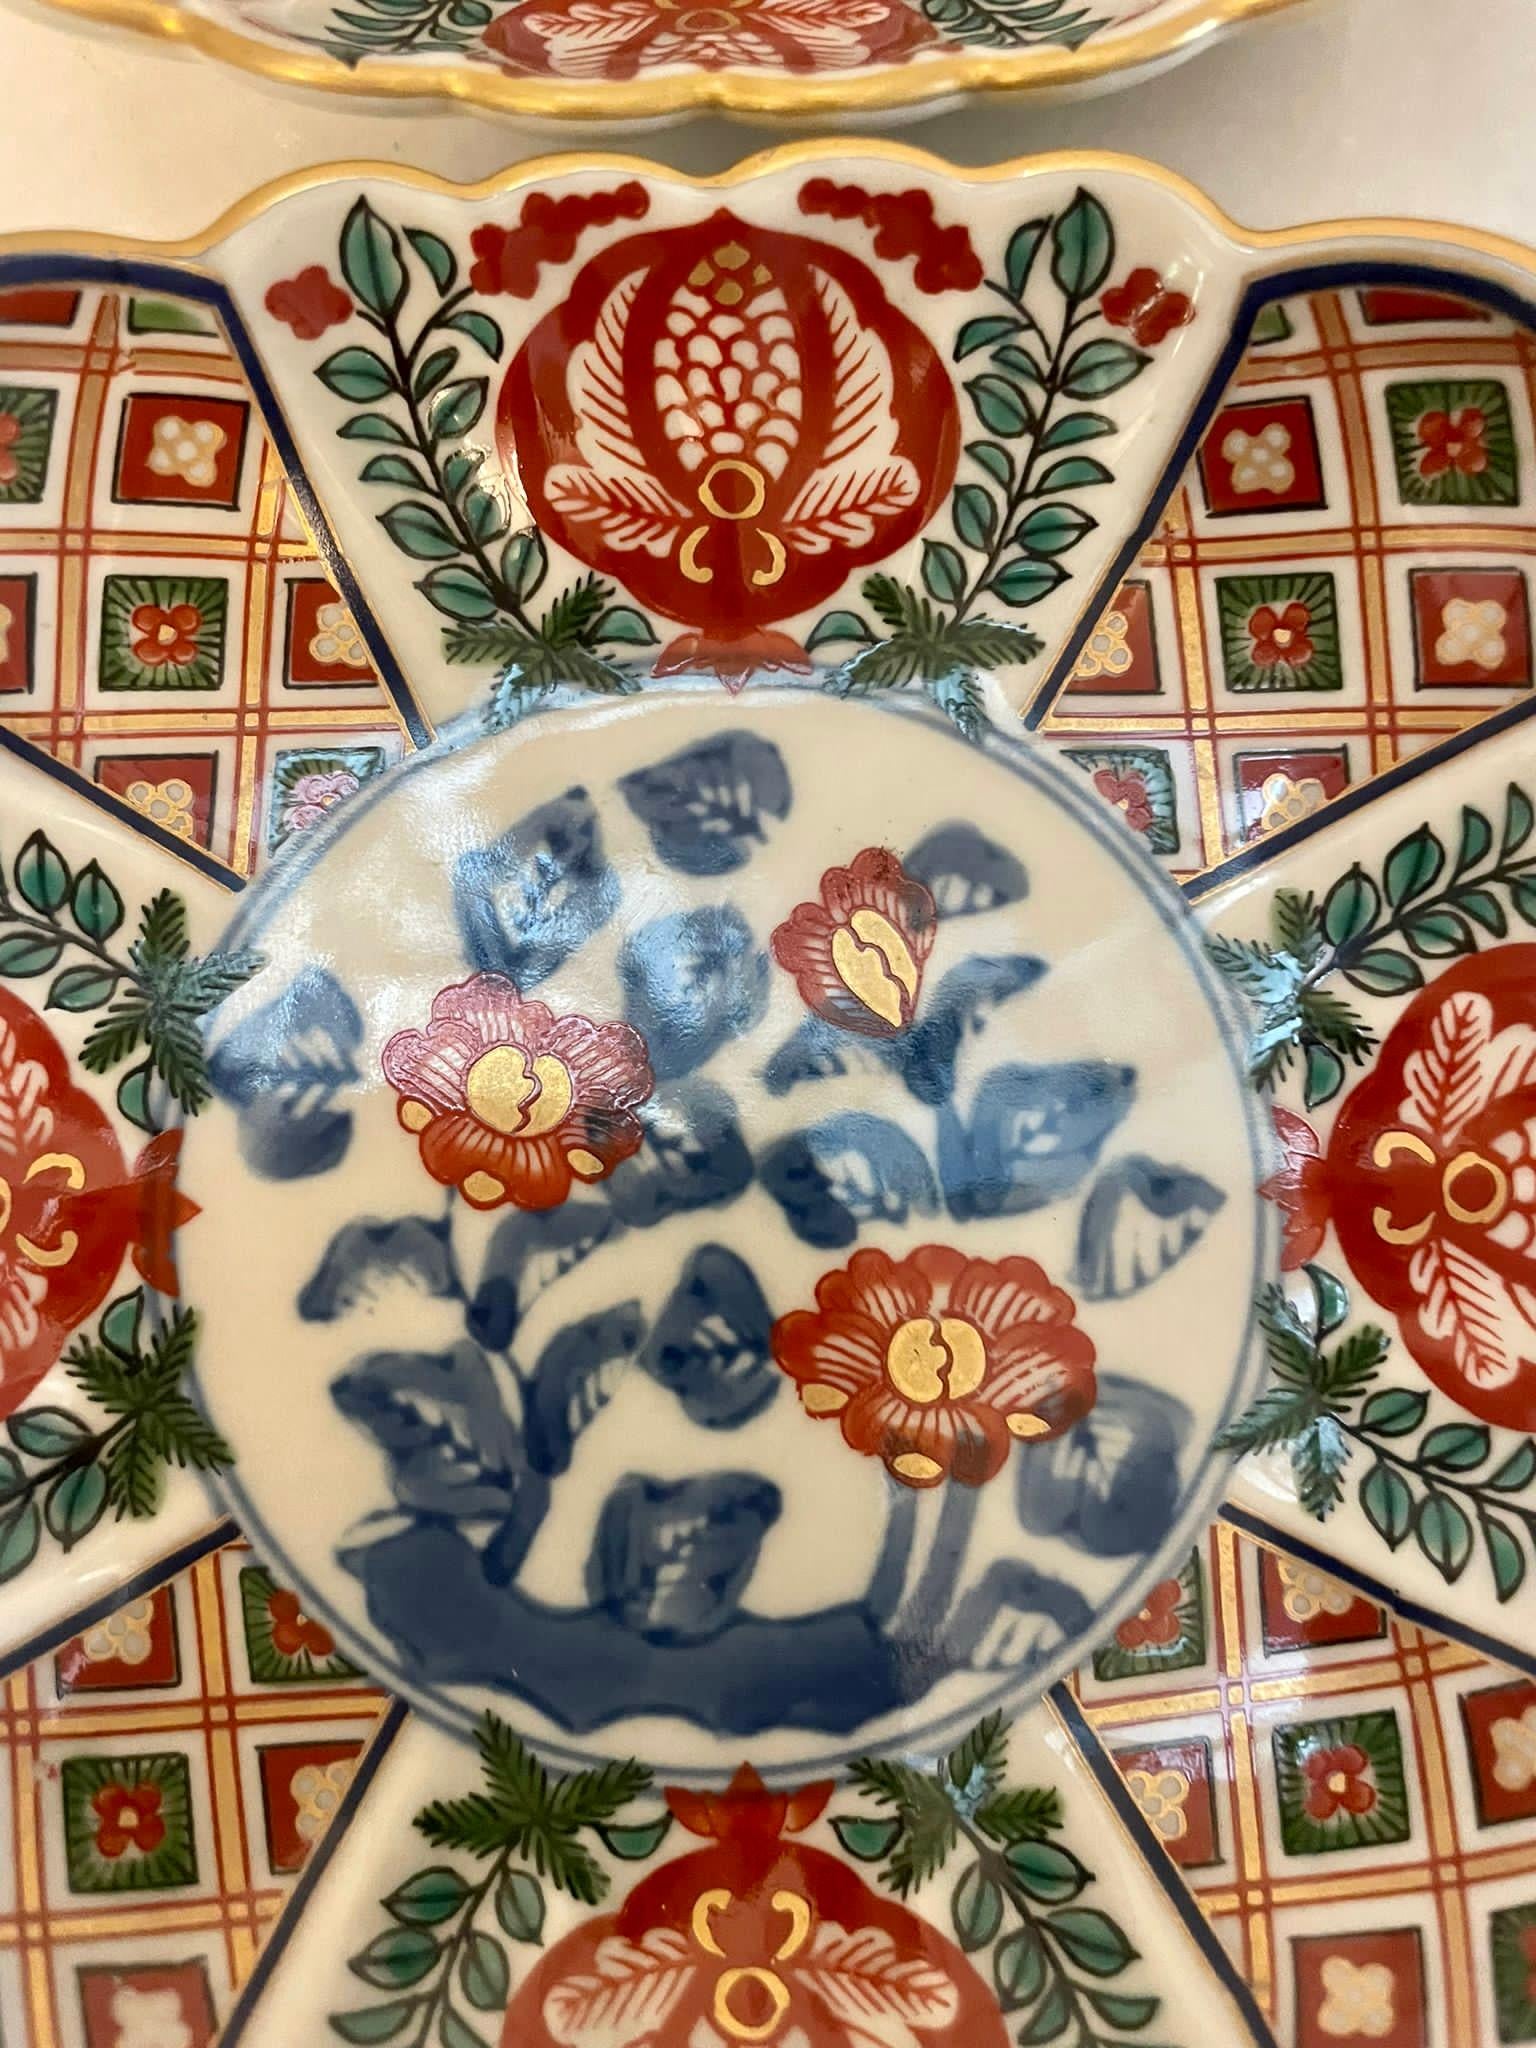 Unusual set of 4 quality antique Japanese Imari Dishes in wonderful hand painted red, green, blue and gold colours with a scalloped edge 

A charming set in fabulous original condition of desirable proportions

Dimensions:
Height 3.2 cm (1.2